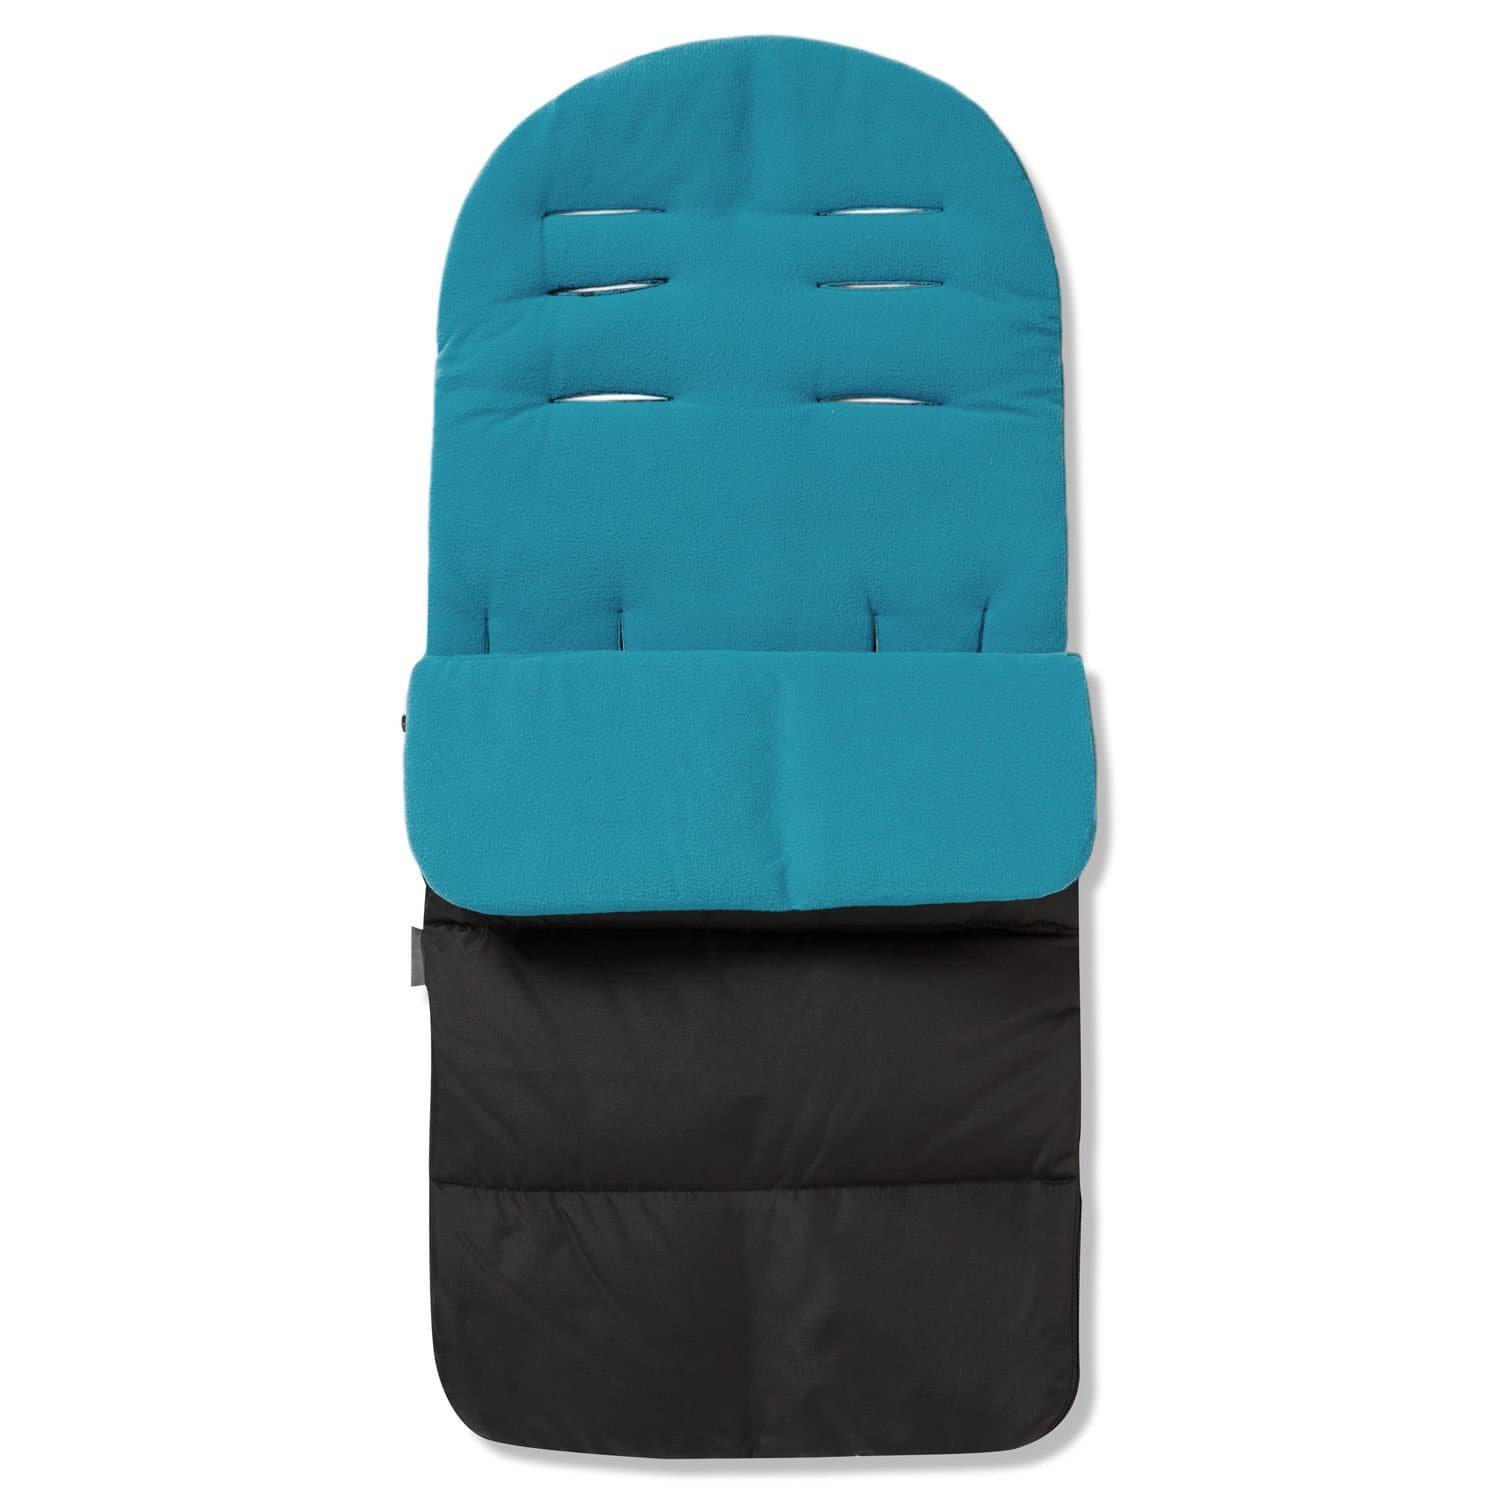 Premium Footmuff / Cosy Toes Compatible with Mutsy - Ocean Blue / Fits All Models | For Your Little One